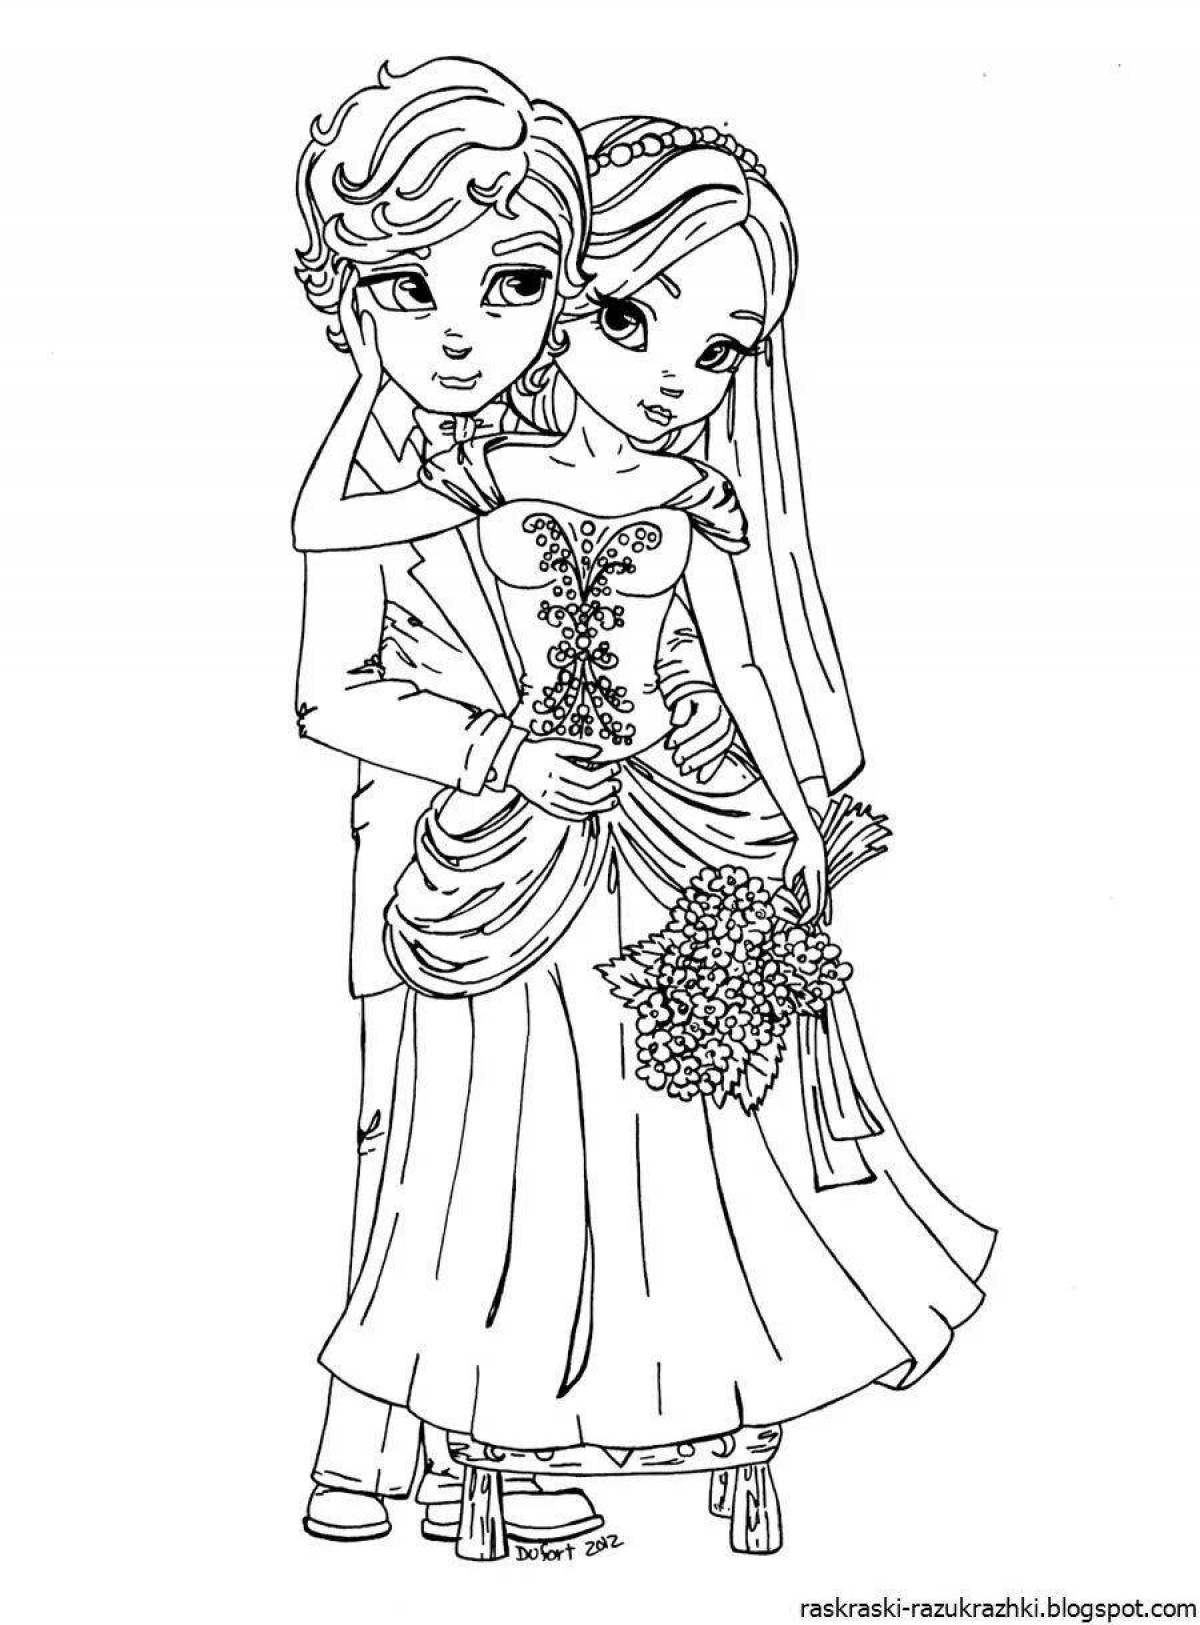 Violent coloring page 11 for girls